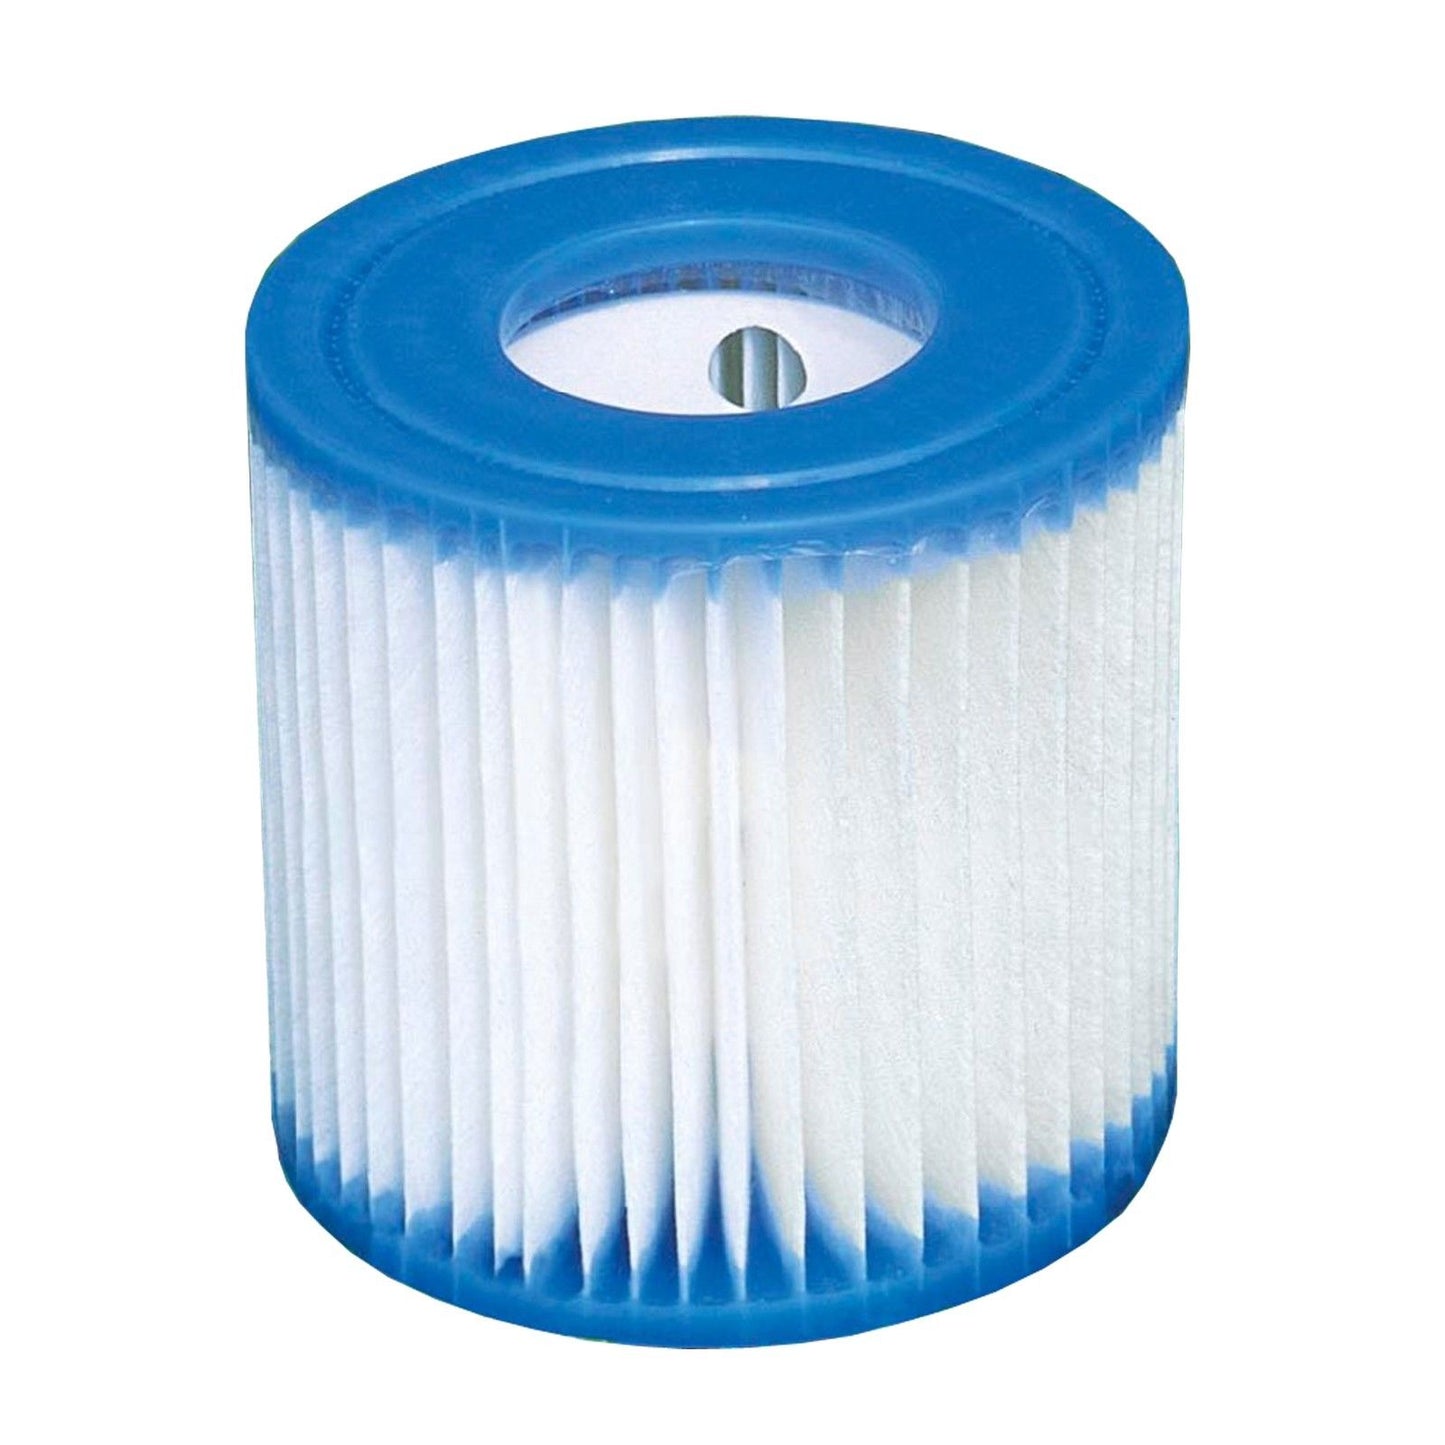 Intex Type H Filter Cartridge for Above Ground Swimming Pool Pumps